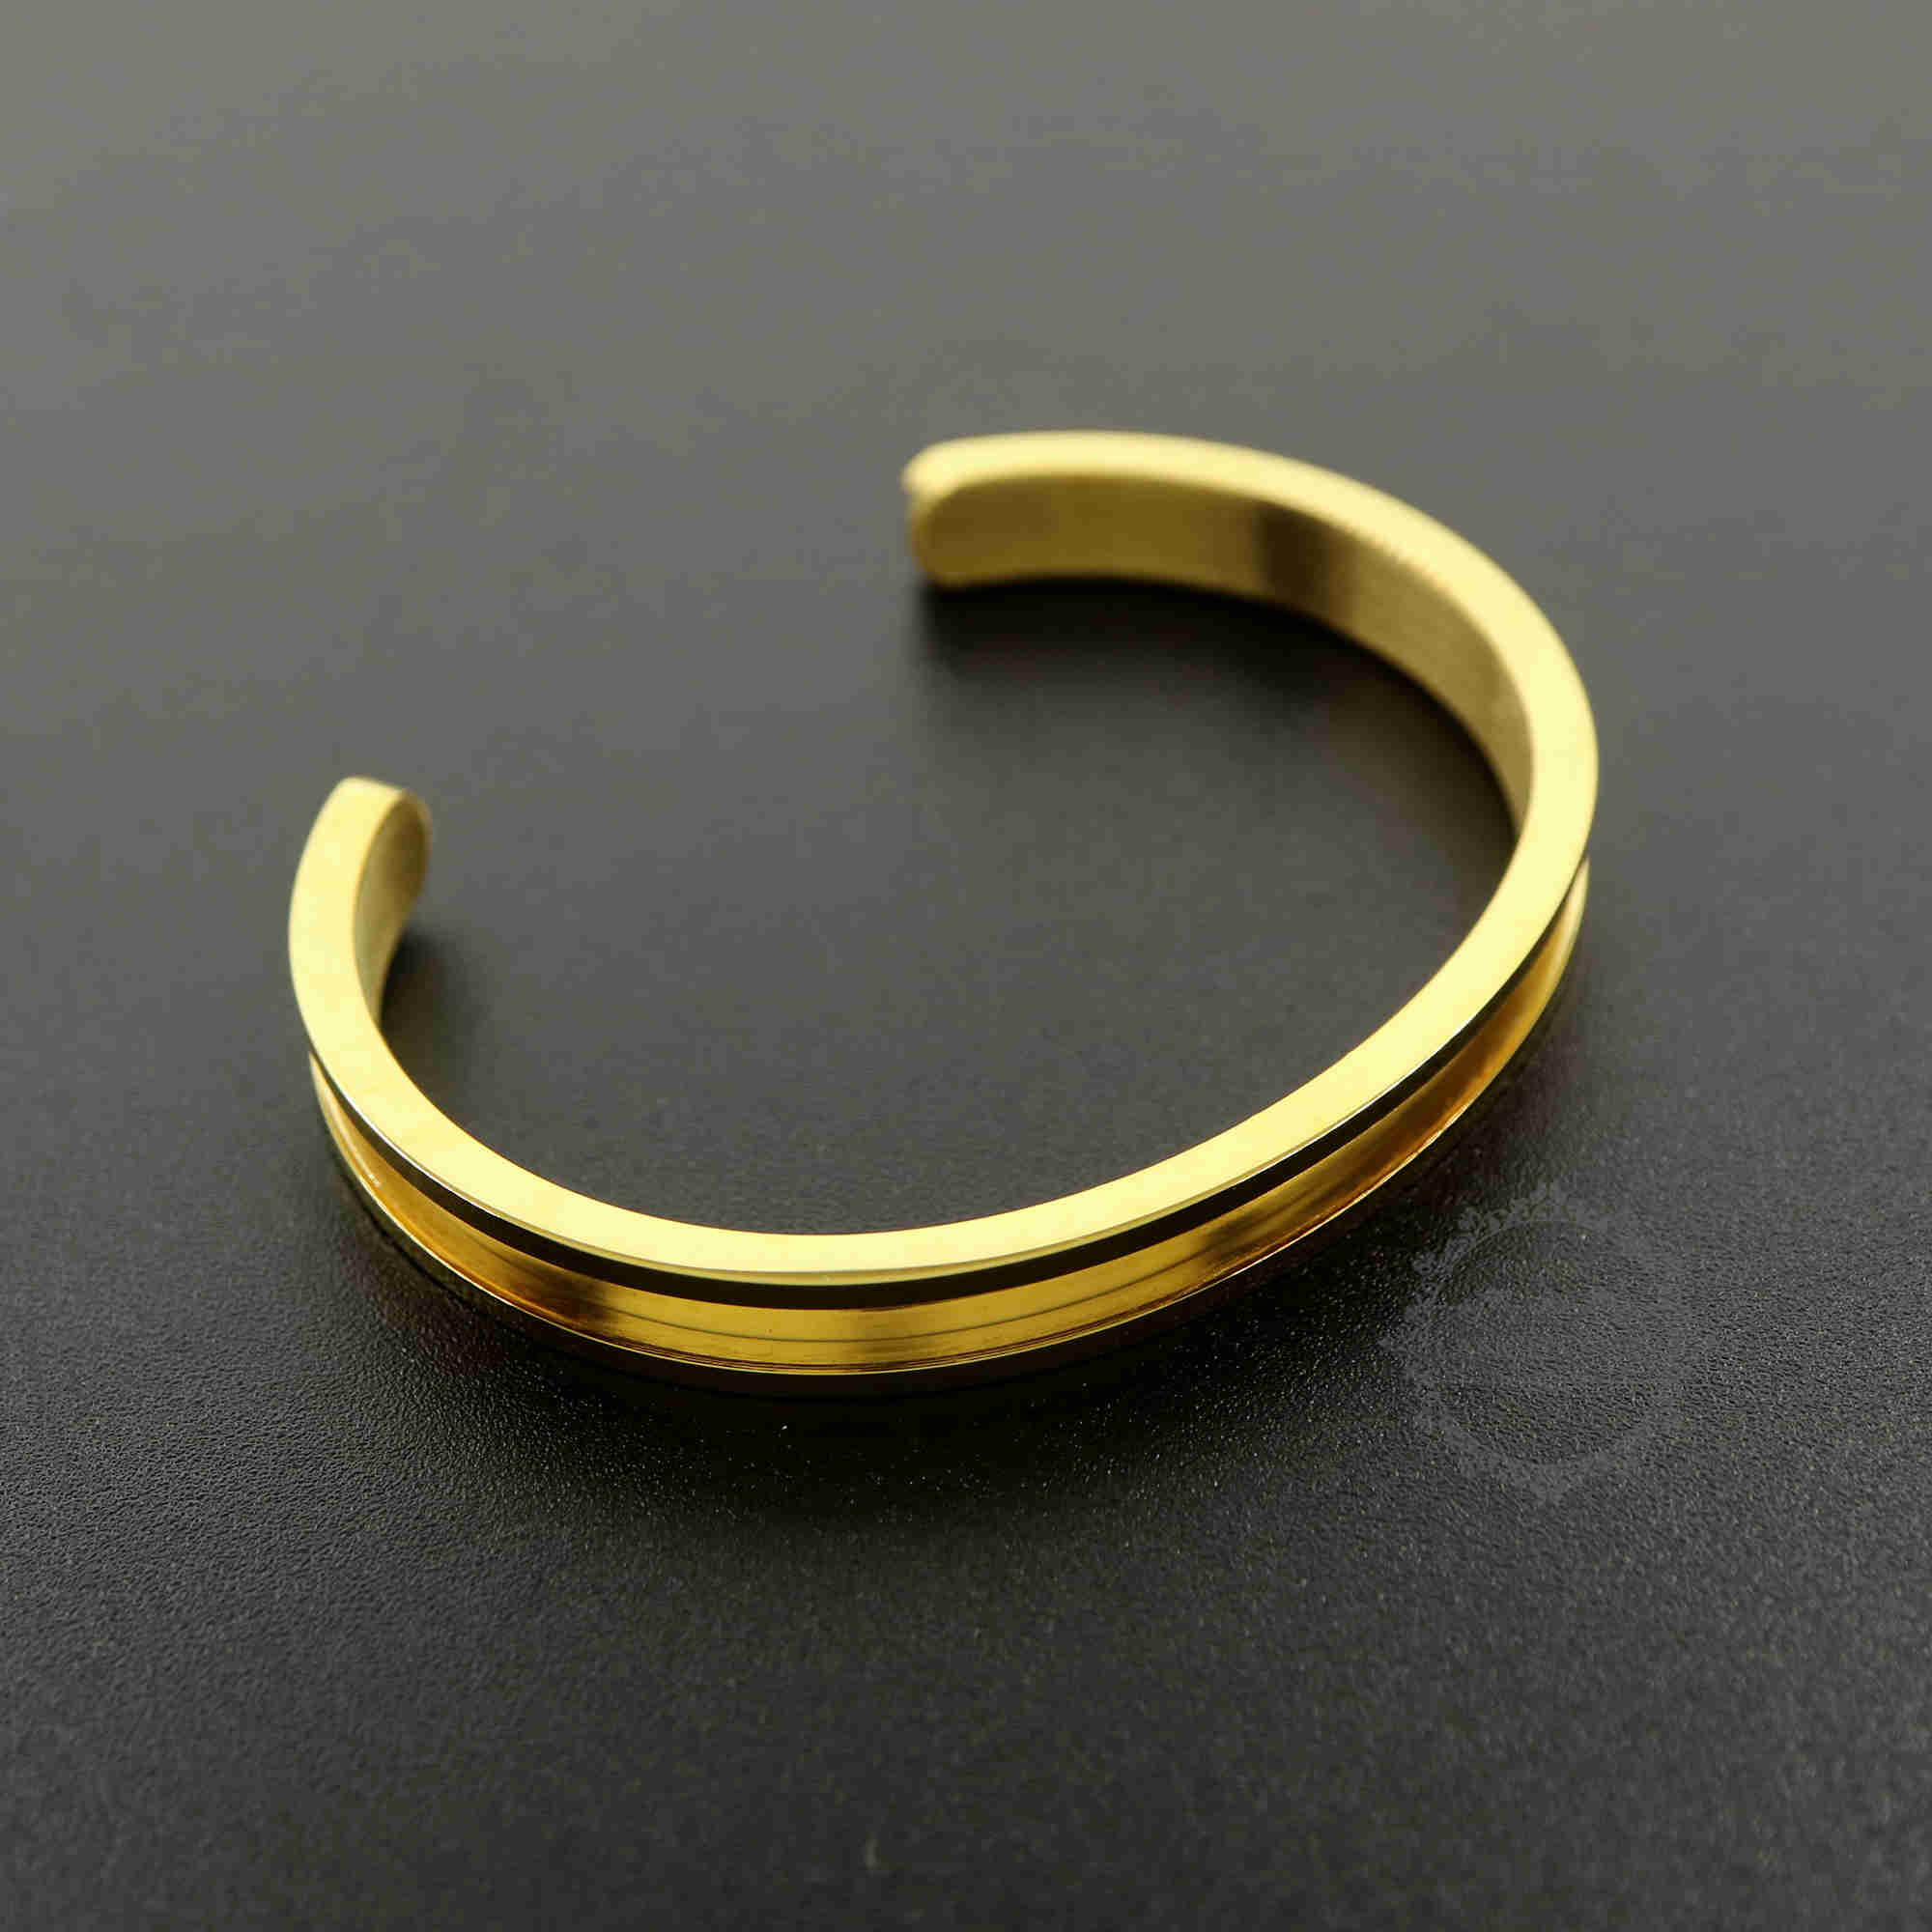 1Pcs 7x57MM Silver,Gold,Rose Gold Stainless Steel Bracelet Bangle with 4MM Width 1.5MM Depth Bezel DIY Supplies 1900175 - Click Image to Close